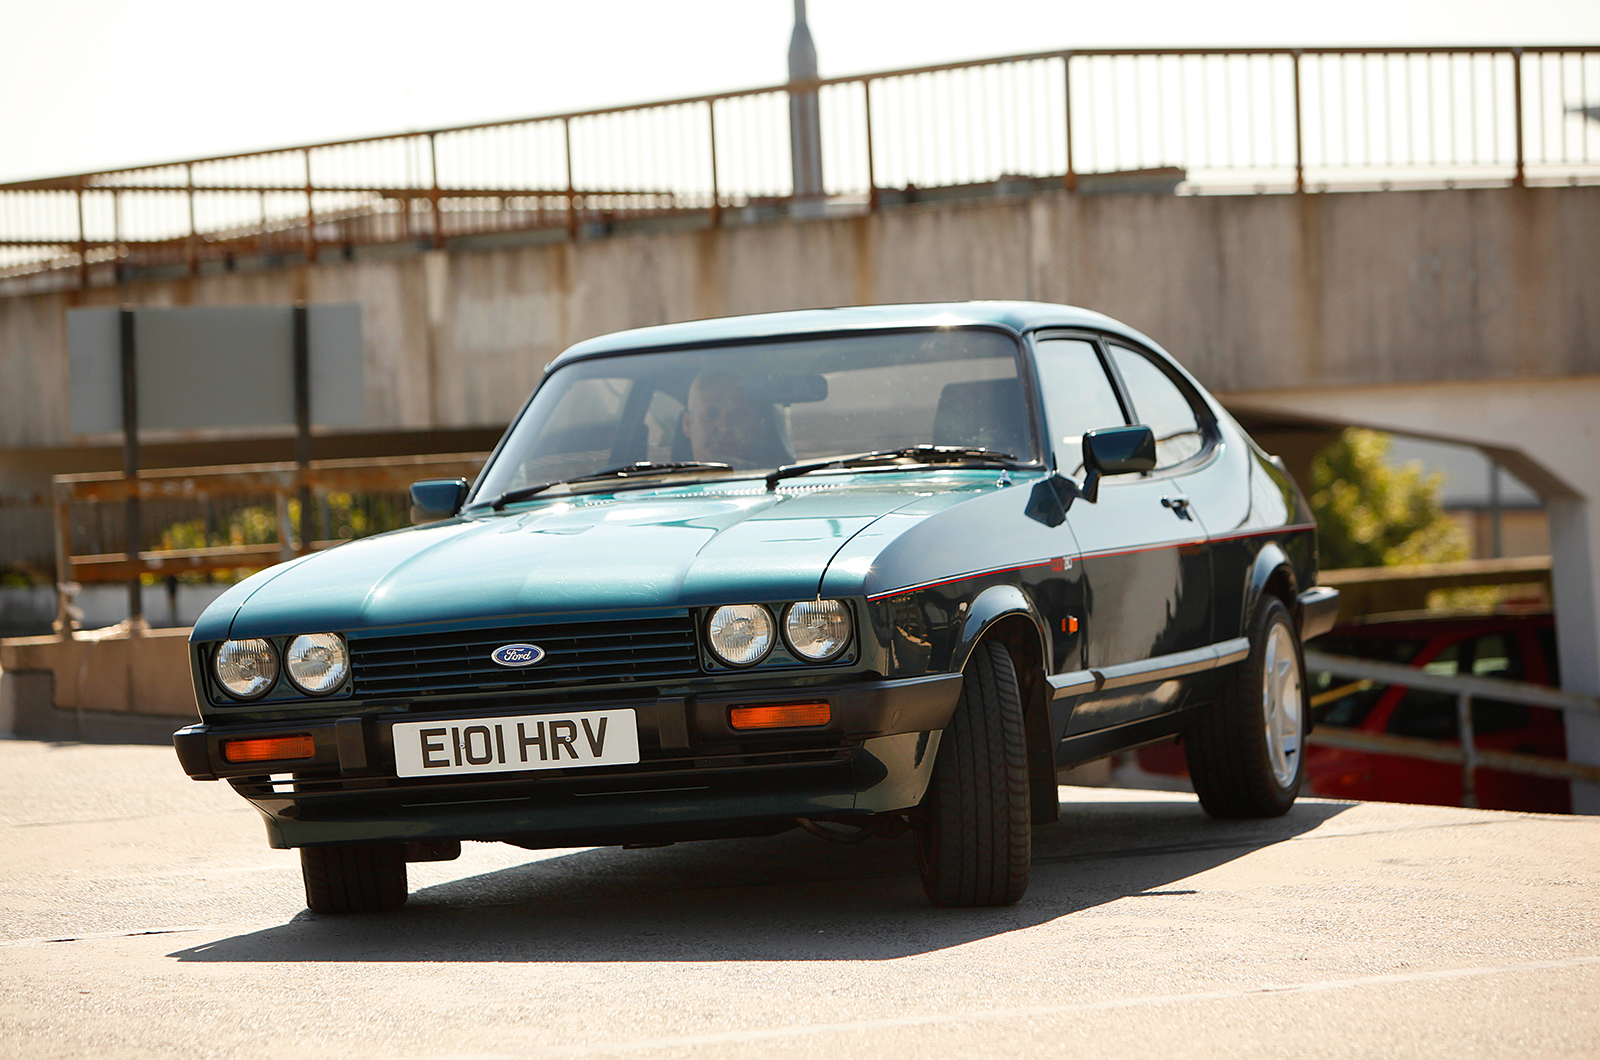 Ford Capri at 50: the classless coupé that conquered the UK